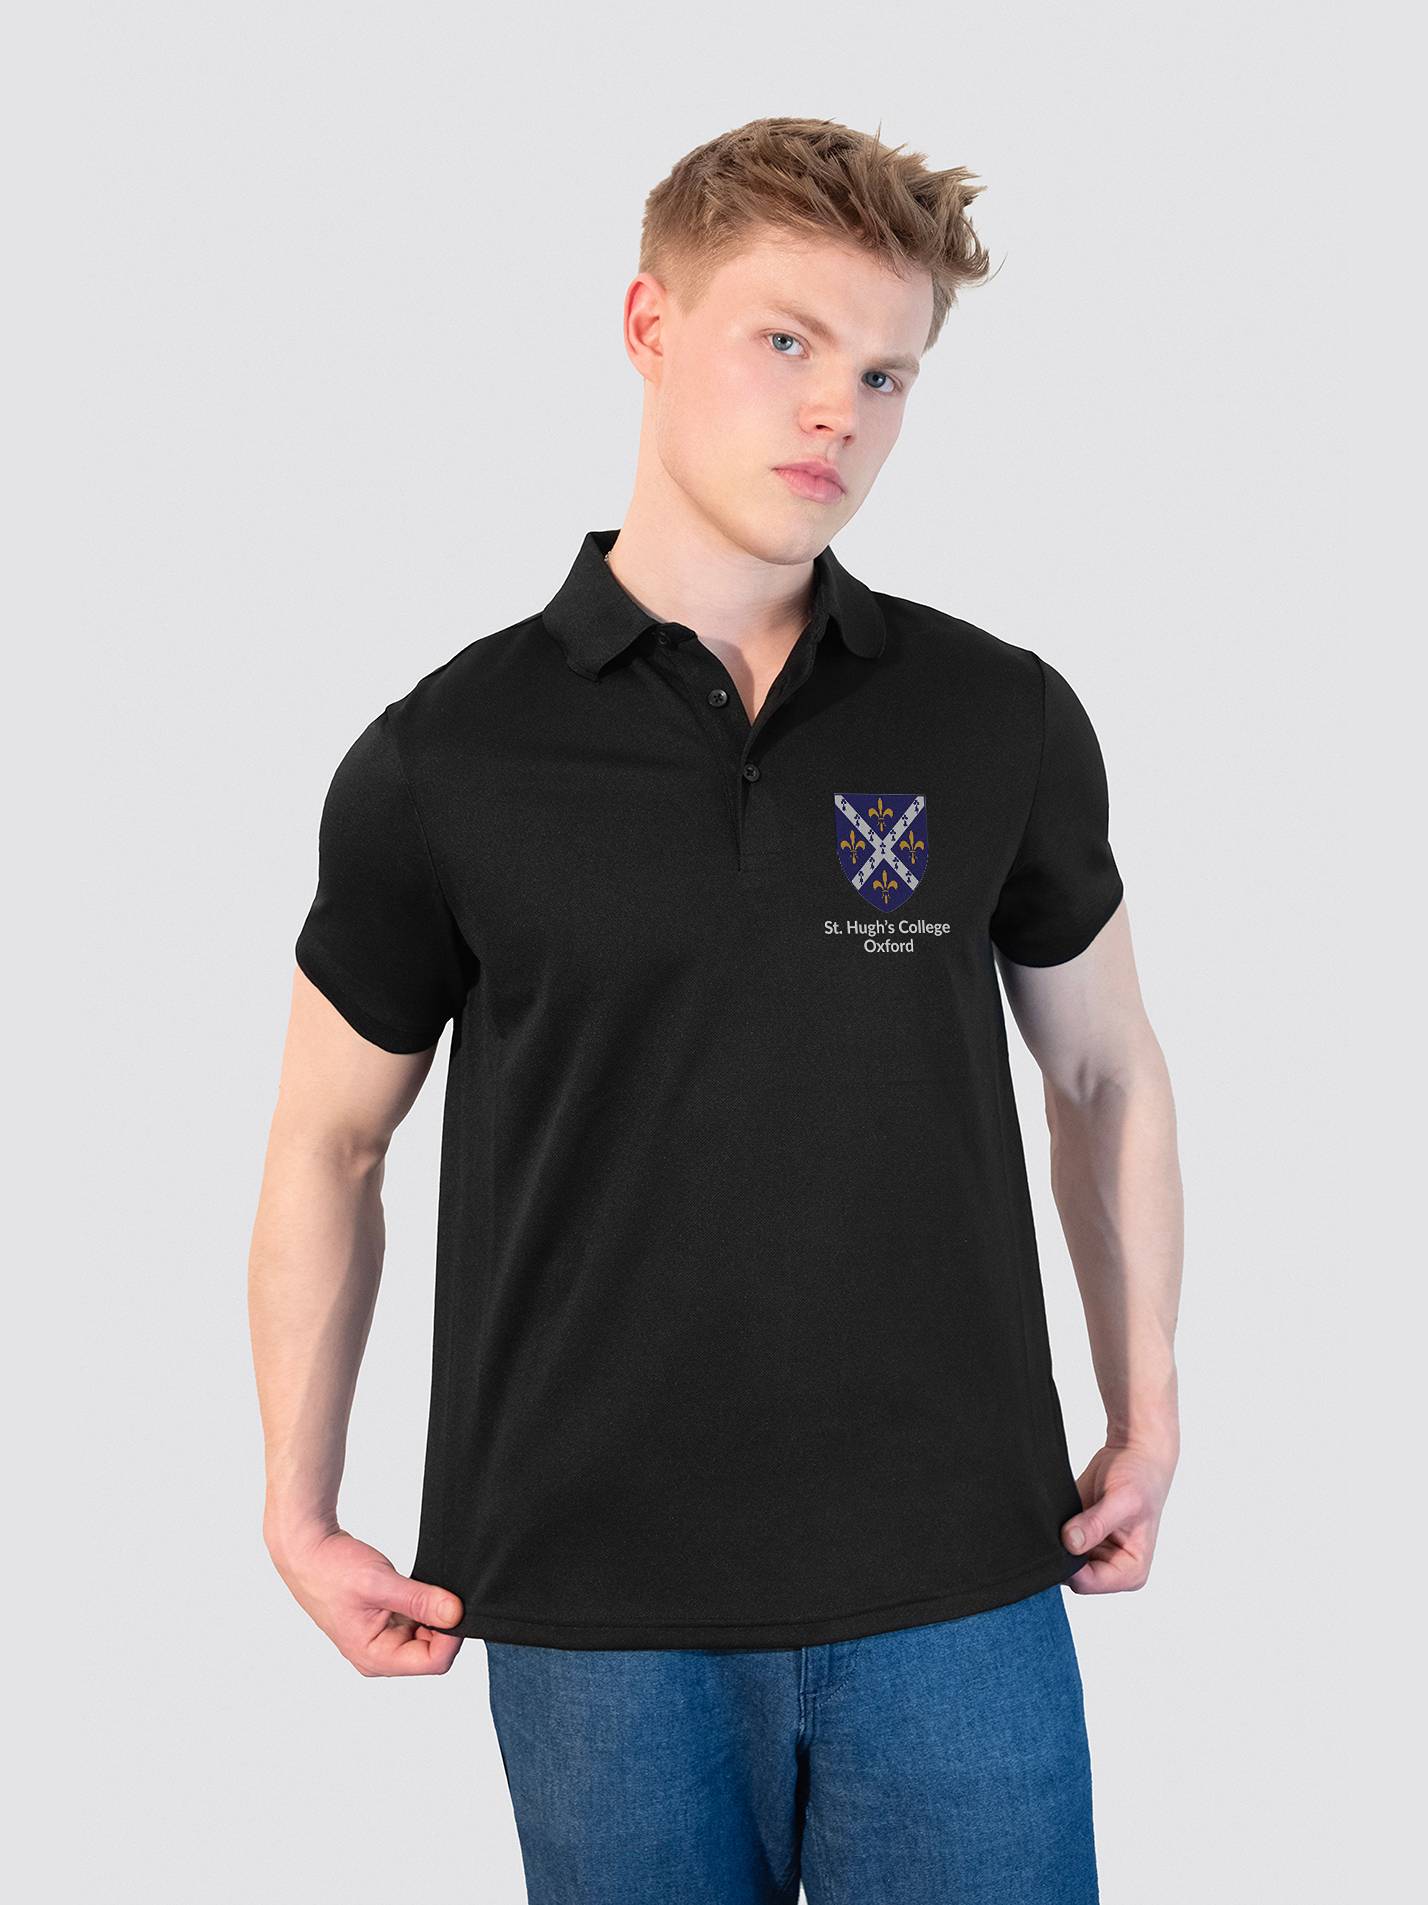 St Hugh's College Oxford Sustainable Men's Polo Shirt